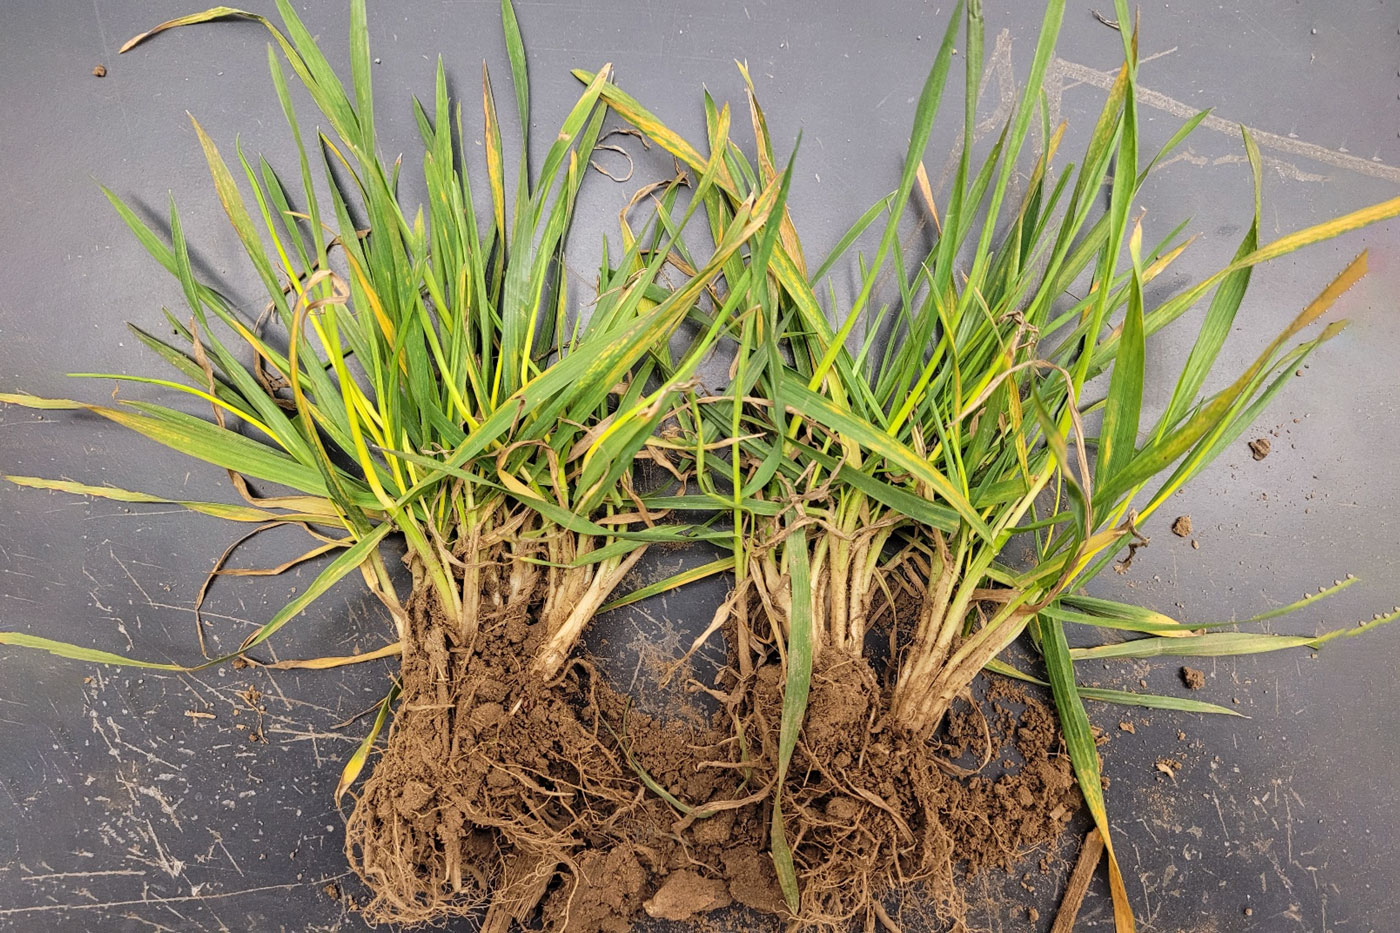 grass with attached roots and yellowing leaf blades